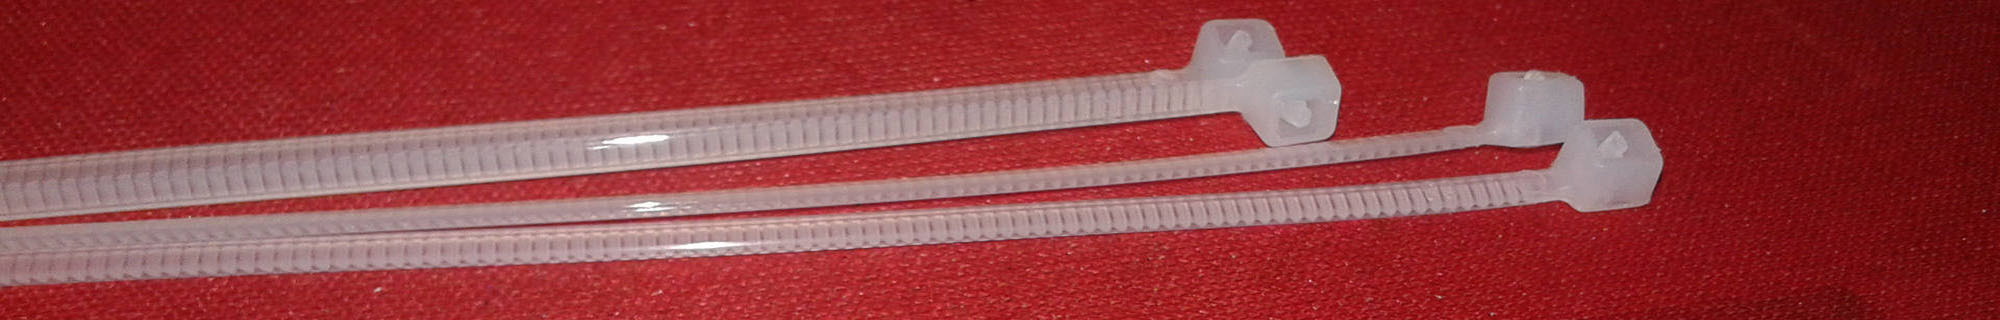 The Cable Tie 150mm, also known as a 6-inch Cable Tie.